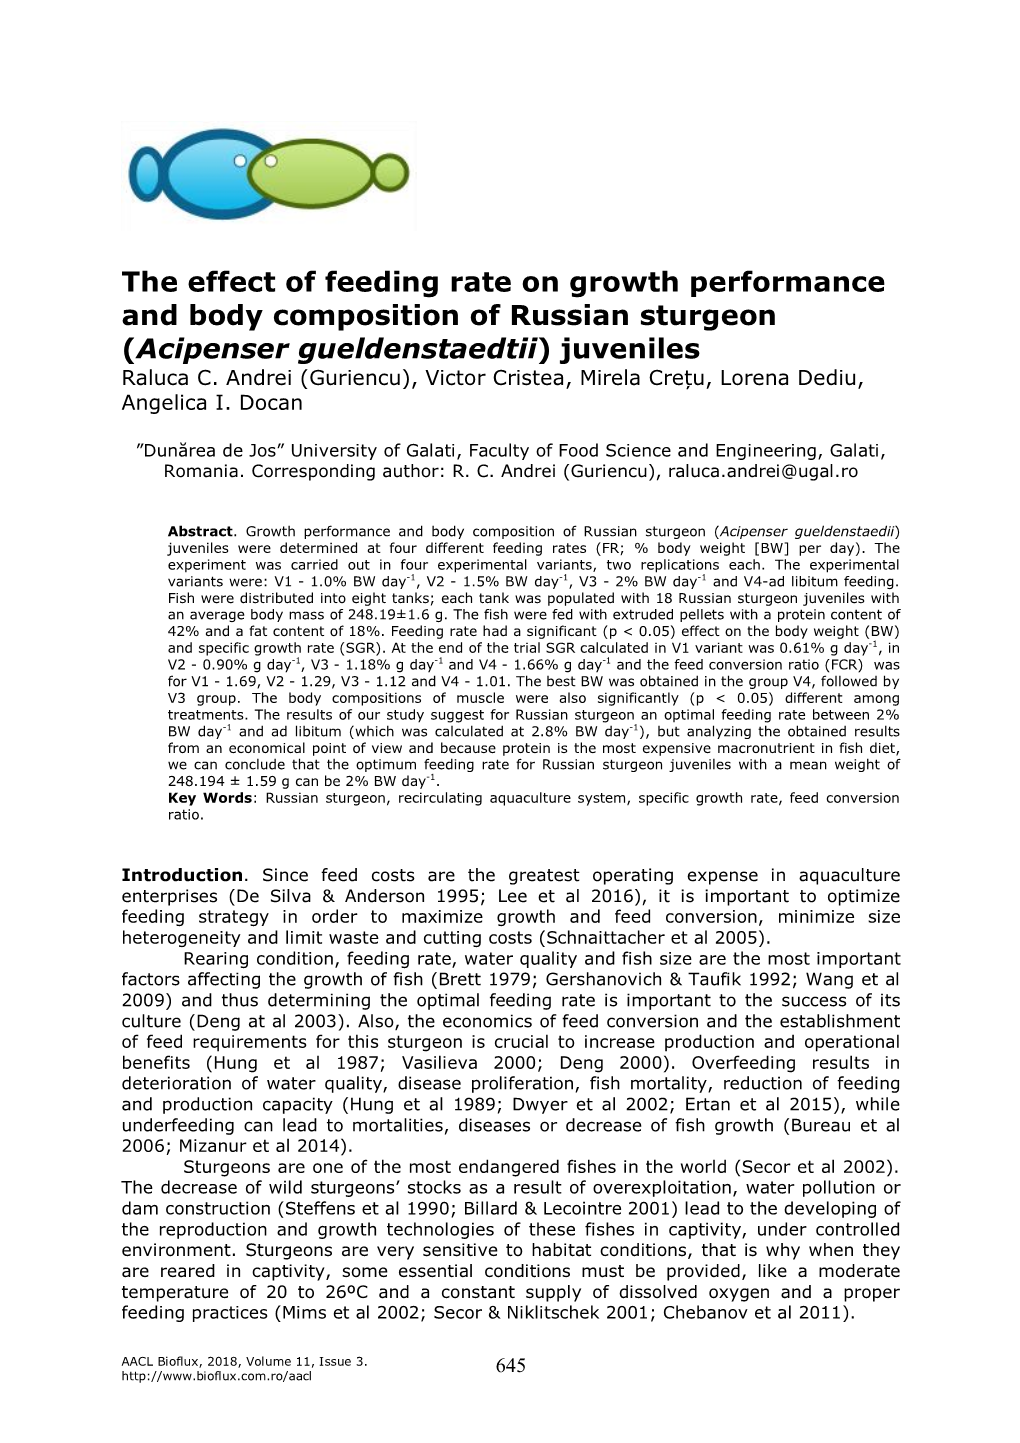 The Effect of Feeding Rate on Growth Performance and Body Composition of Russian Sturgeon (Acipenser Gueldenstaedtii) Juveniles Raluca C